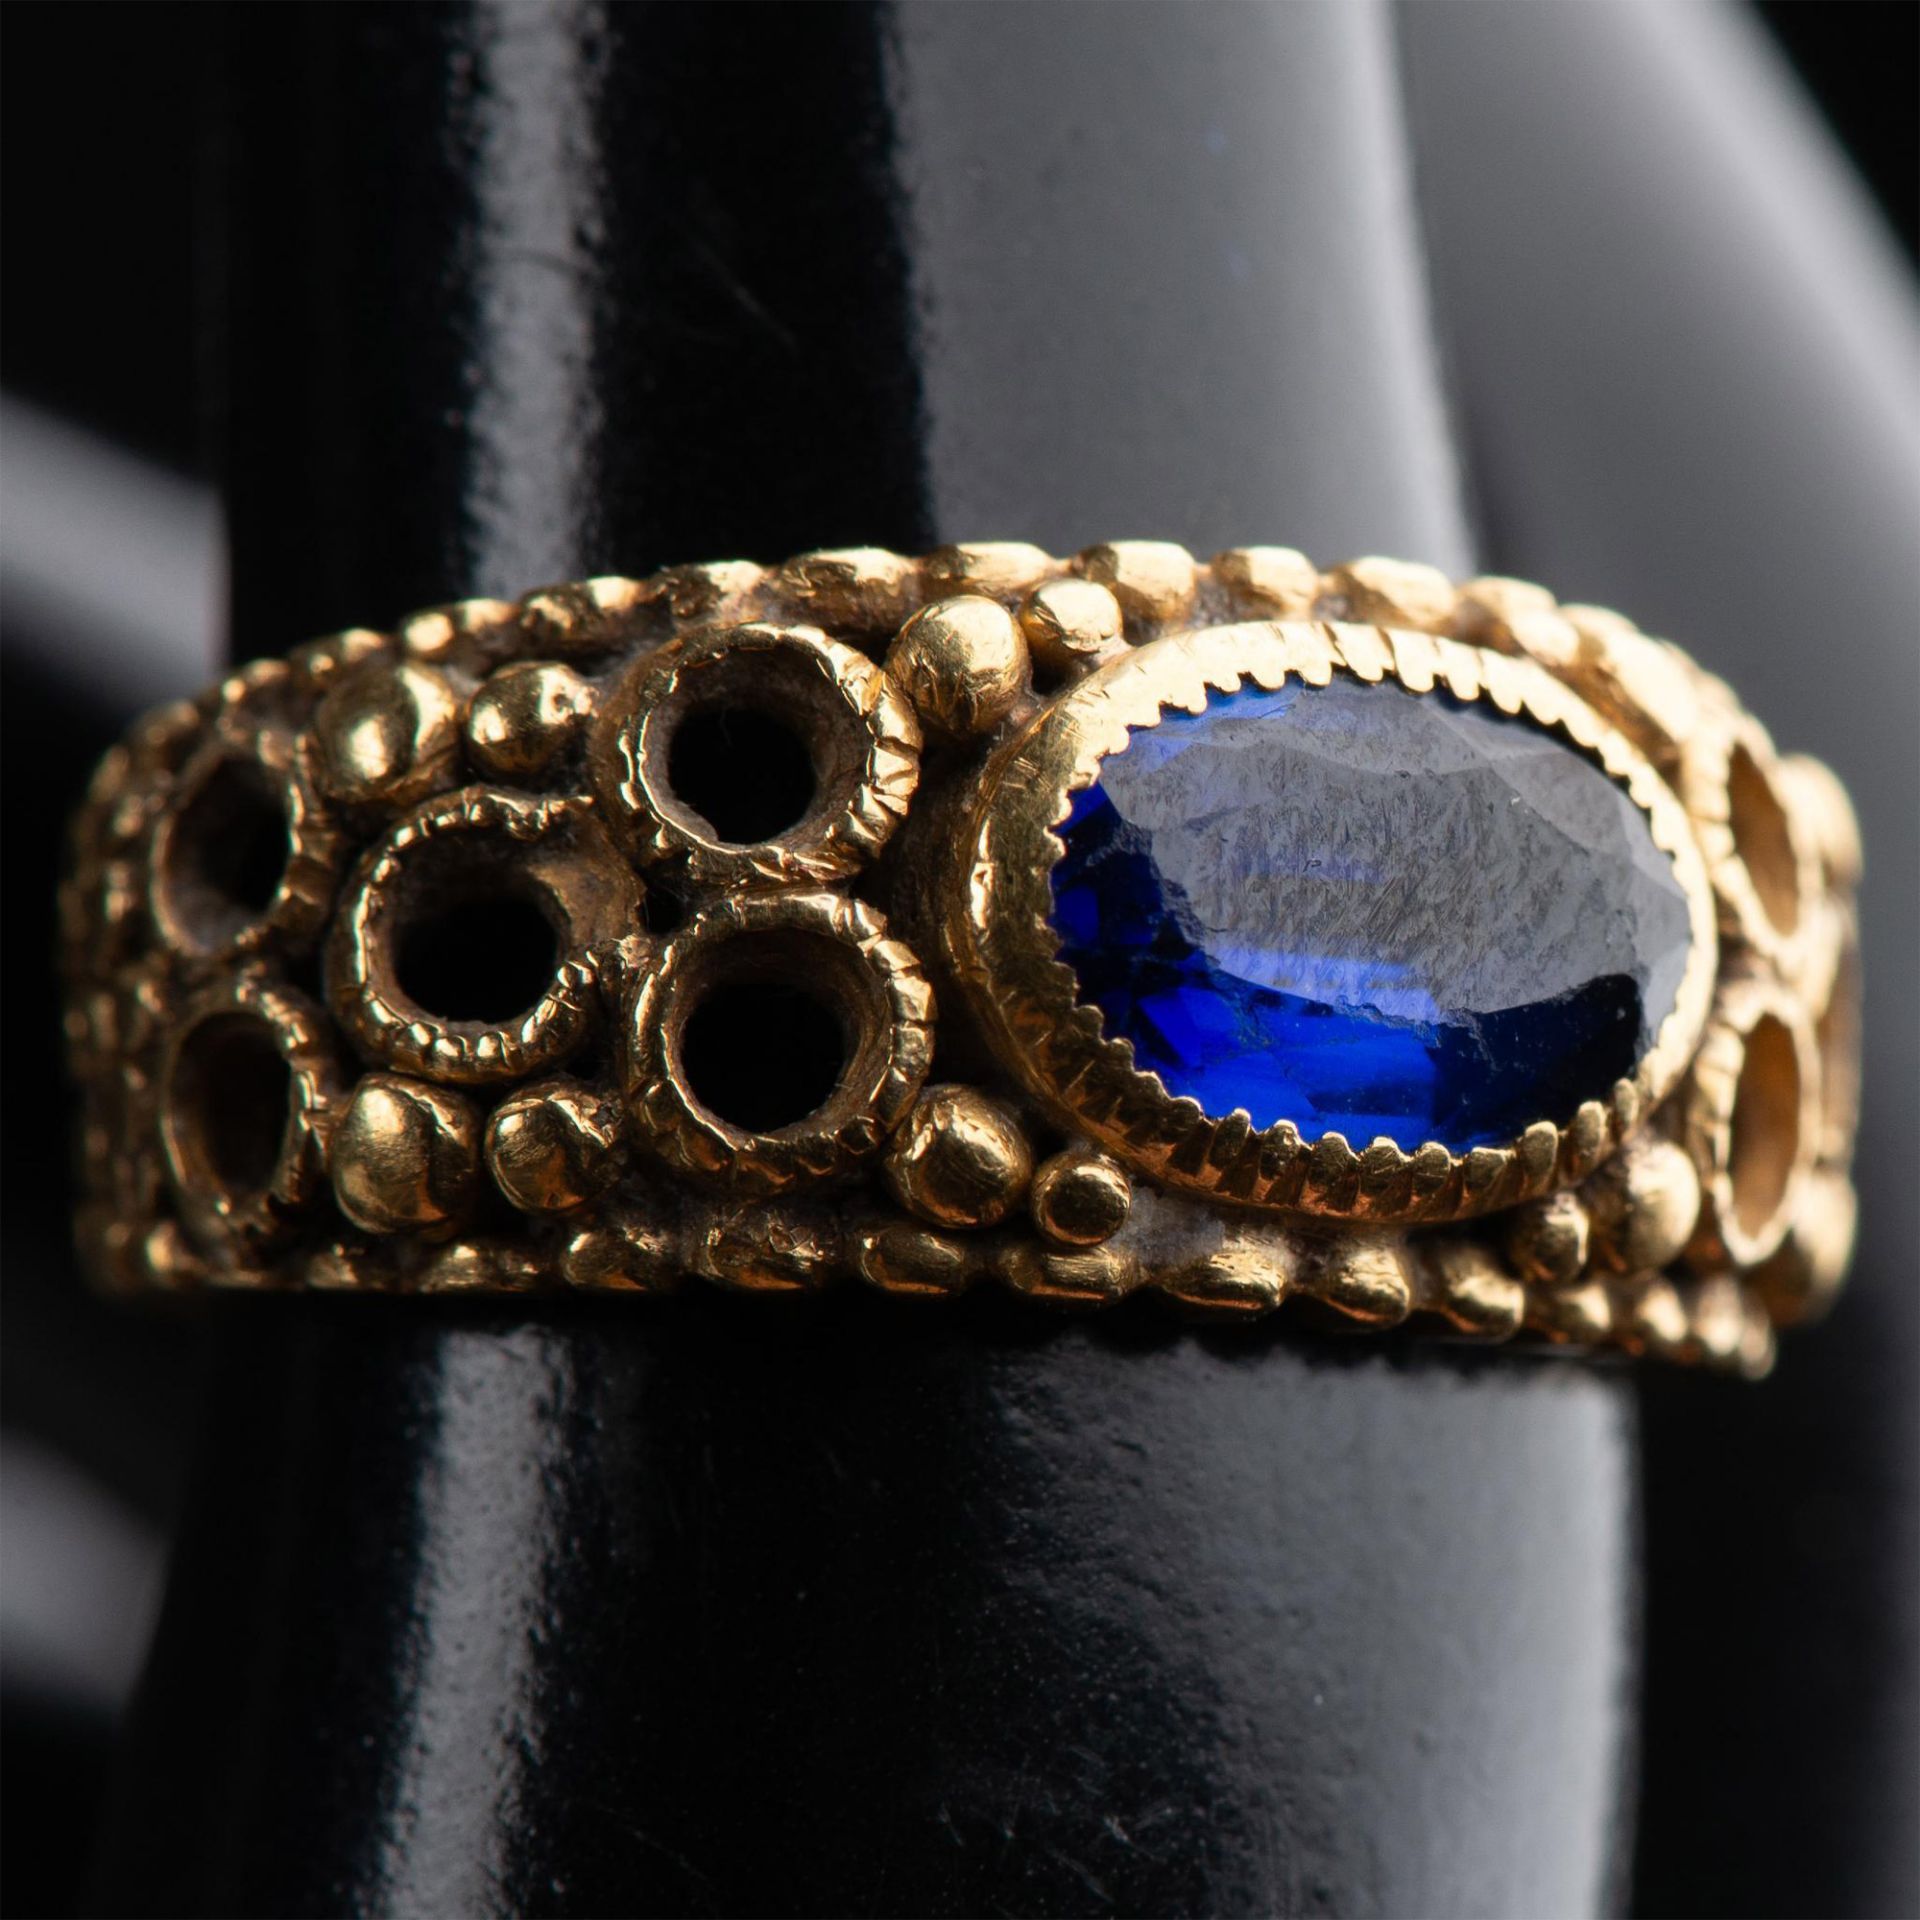 Antique 19th c. 20K Gold and Natural Sapphire Ring - Image 4 of 5